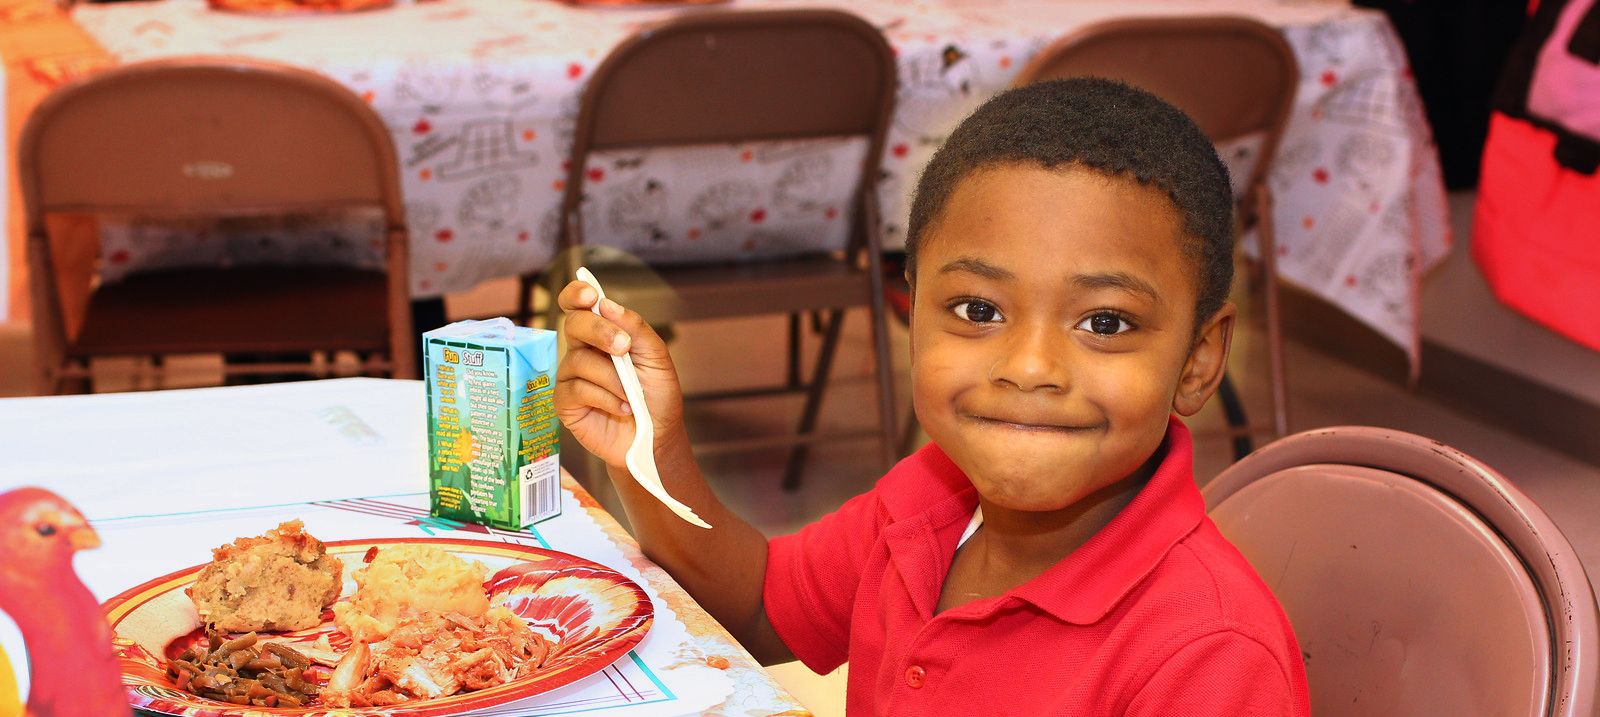 A smiling child is holding a fork over a plate of food with a juice box on the table.